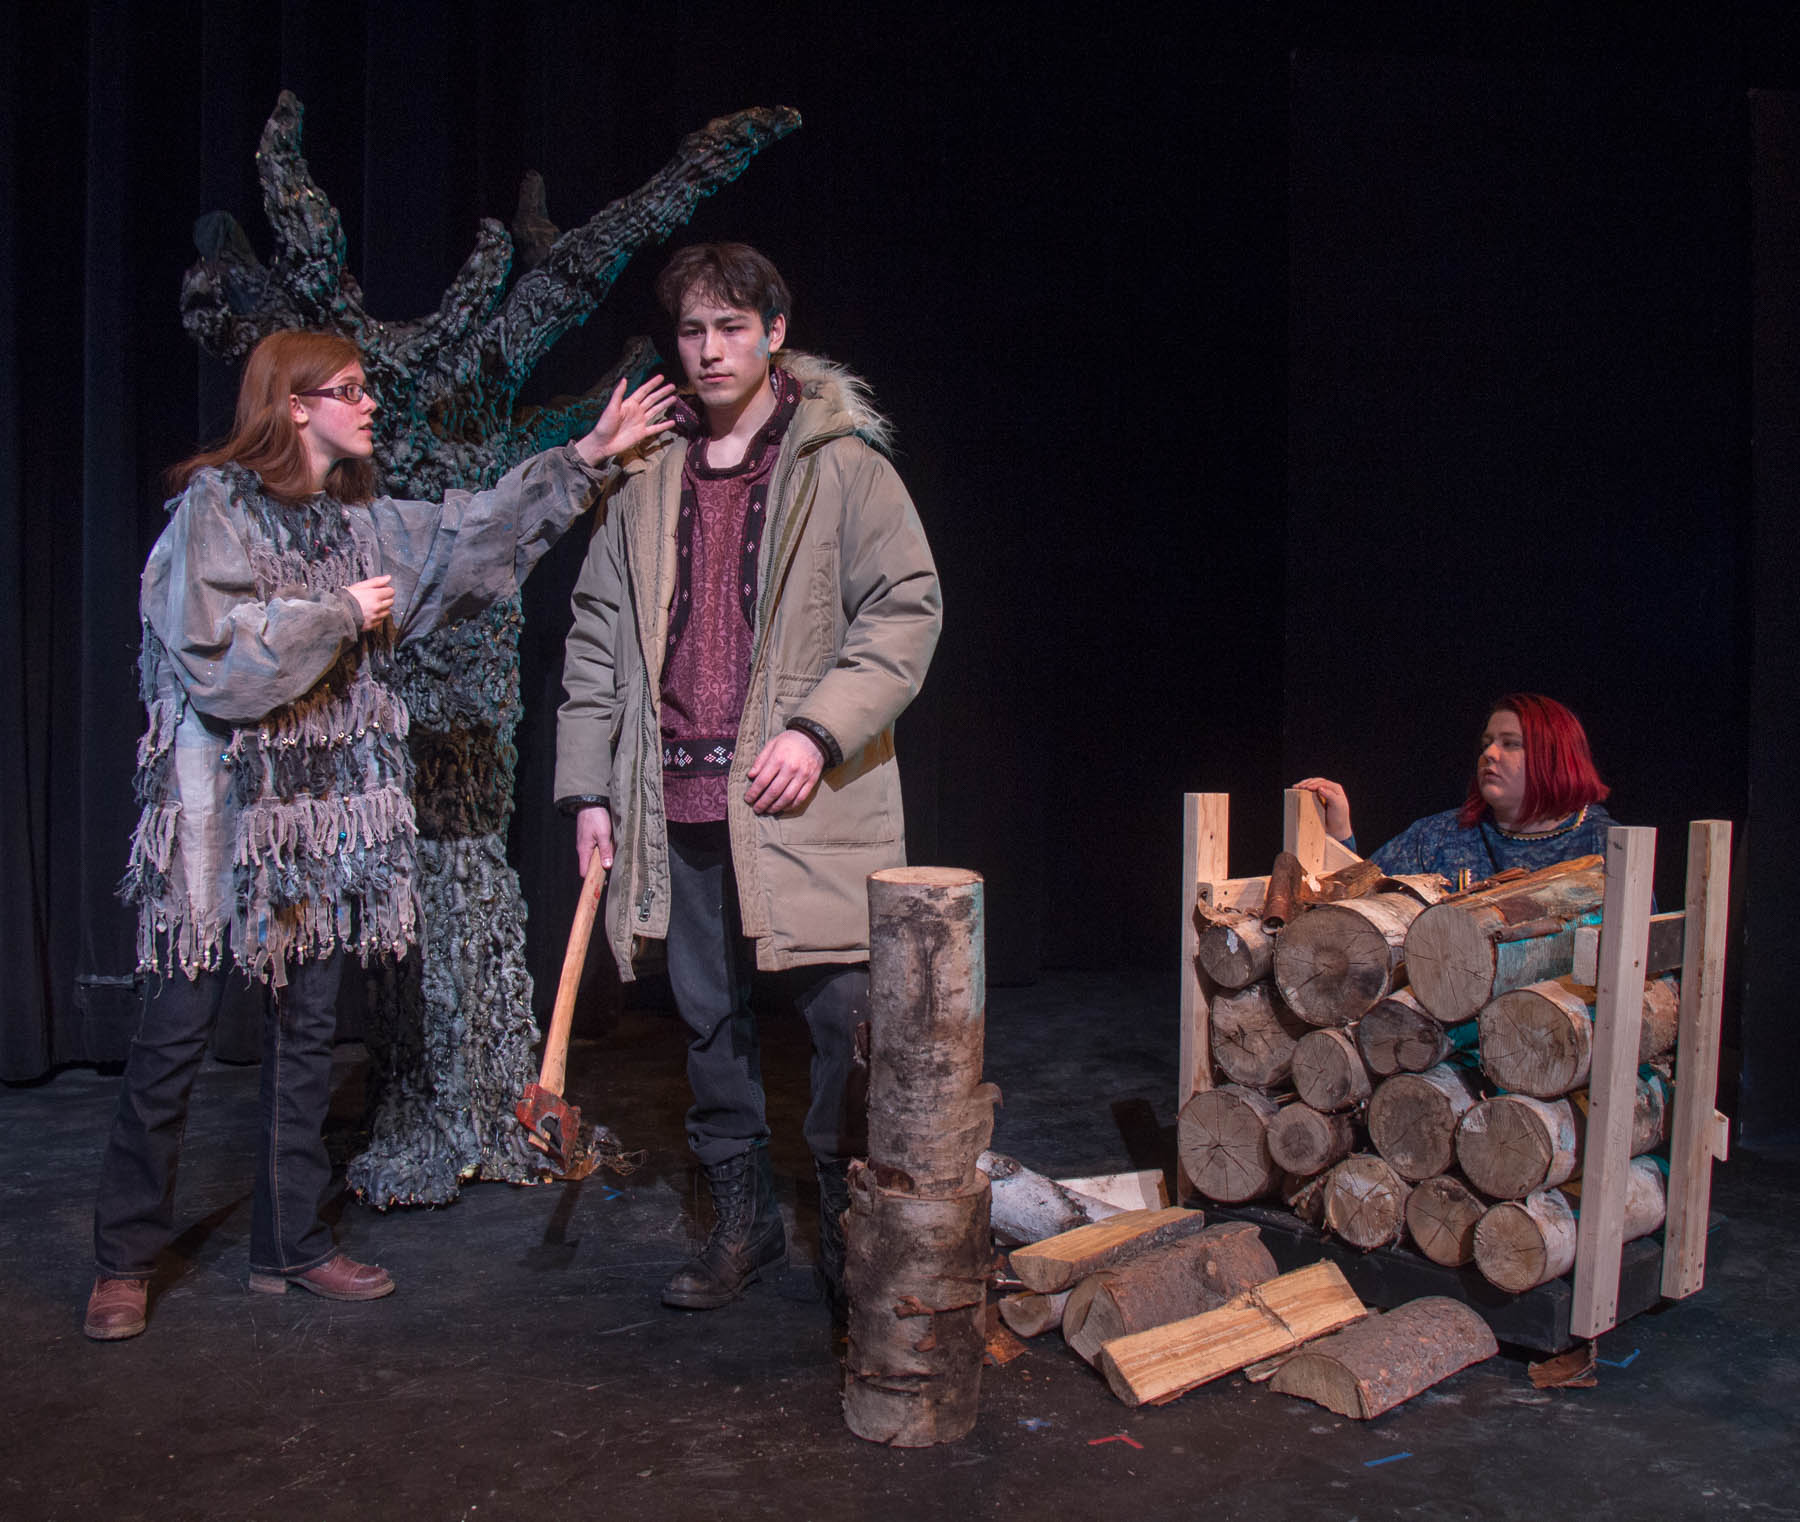 'Cacetugmi' featuring (from left to right) Brittany Bowling, Jared Olin, and Bella Sellers.